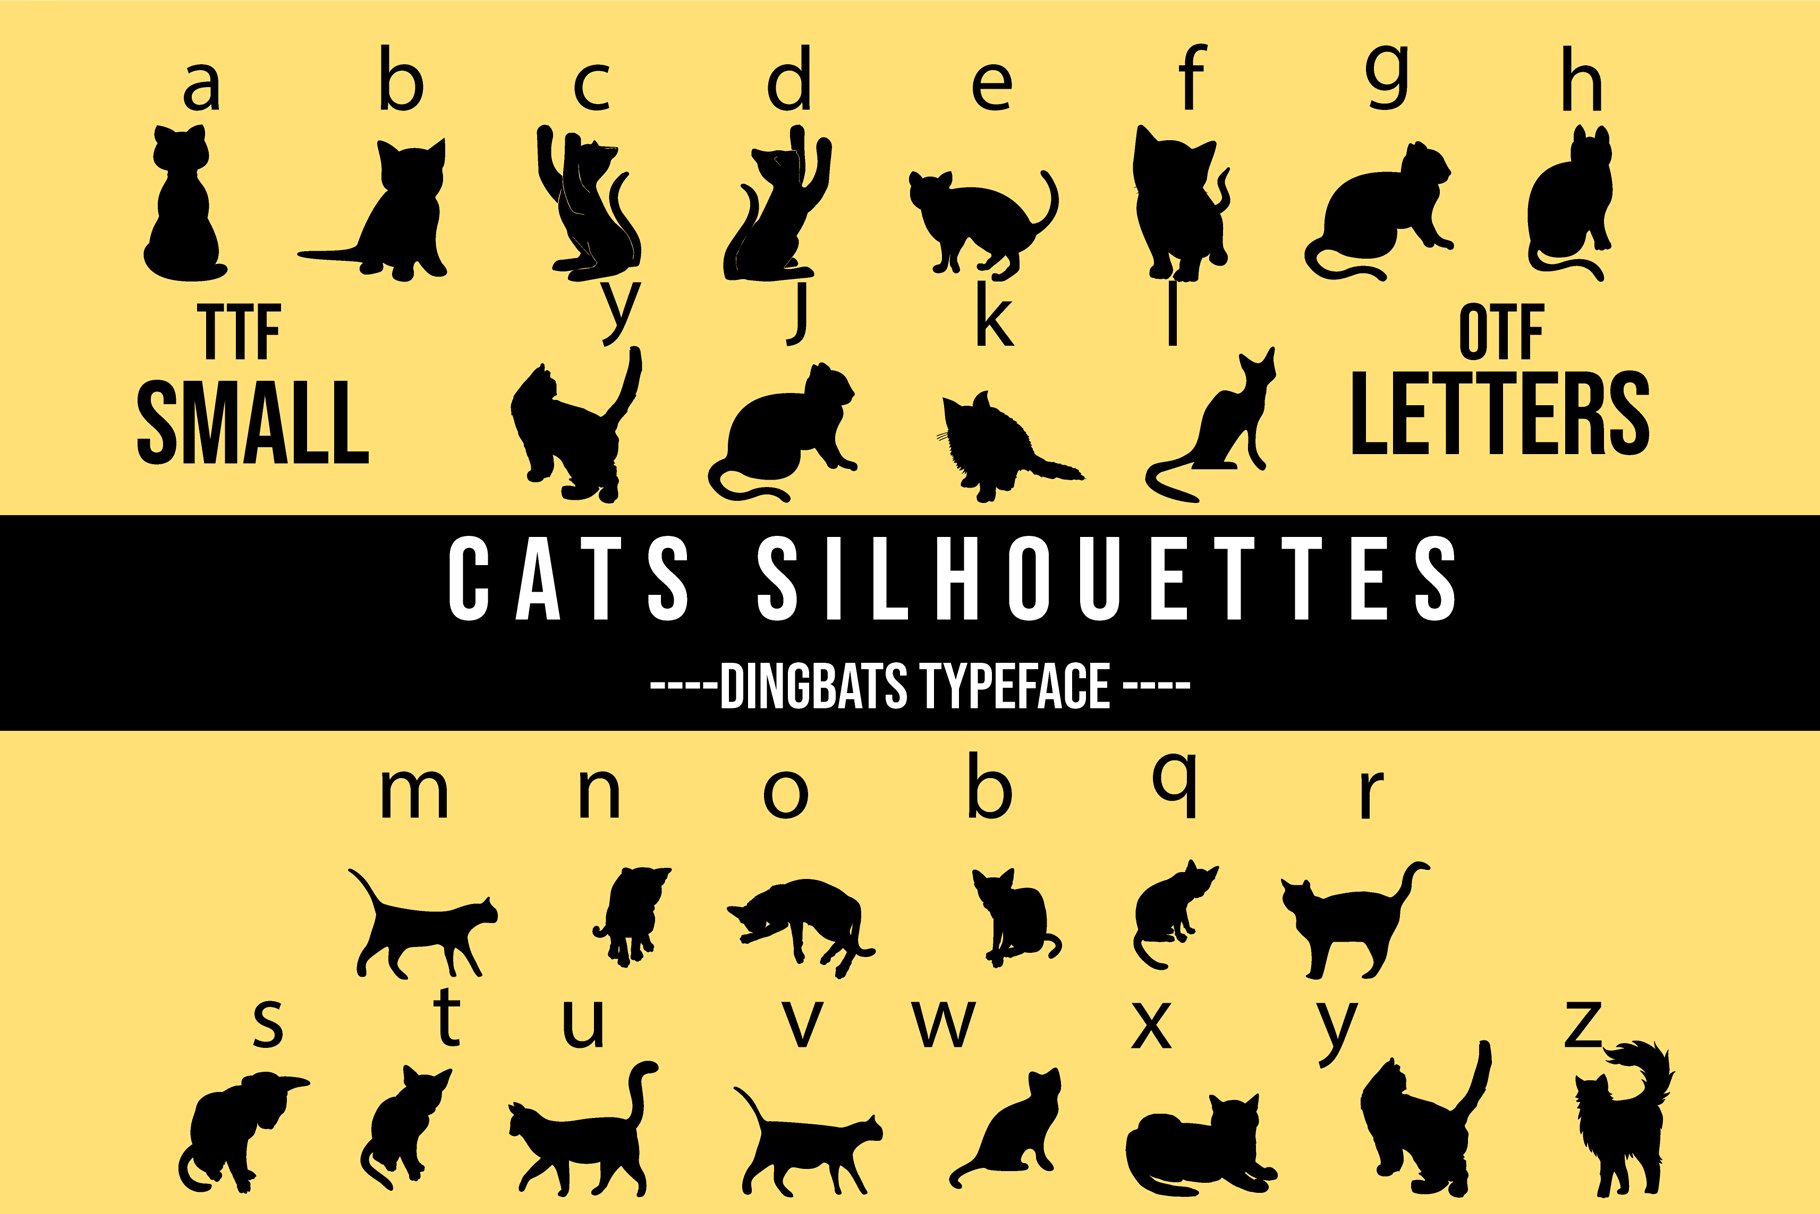 Cats Silhouettes Dingbats Font cover image.